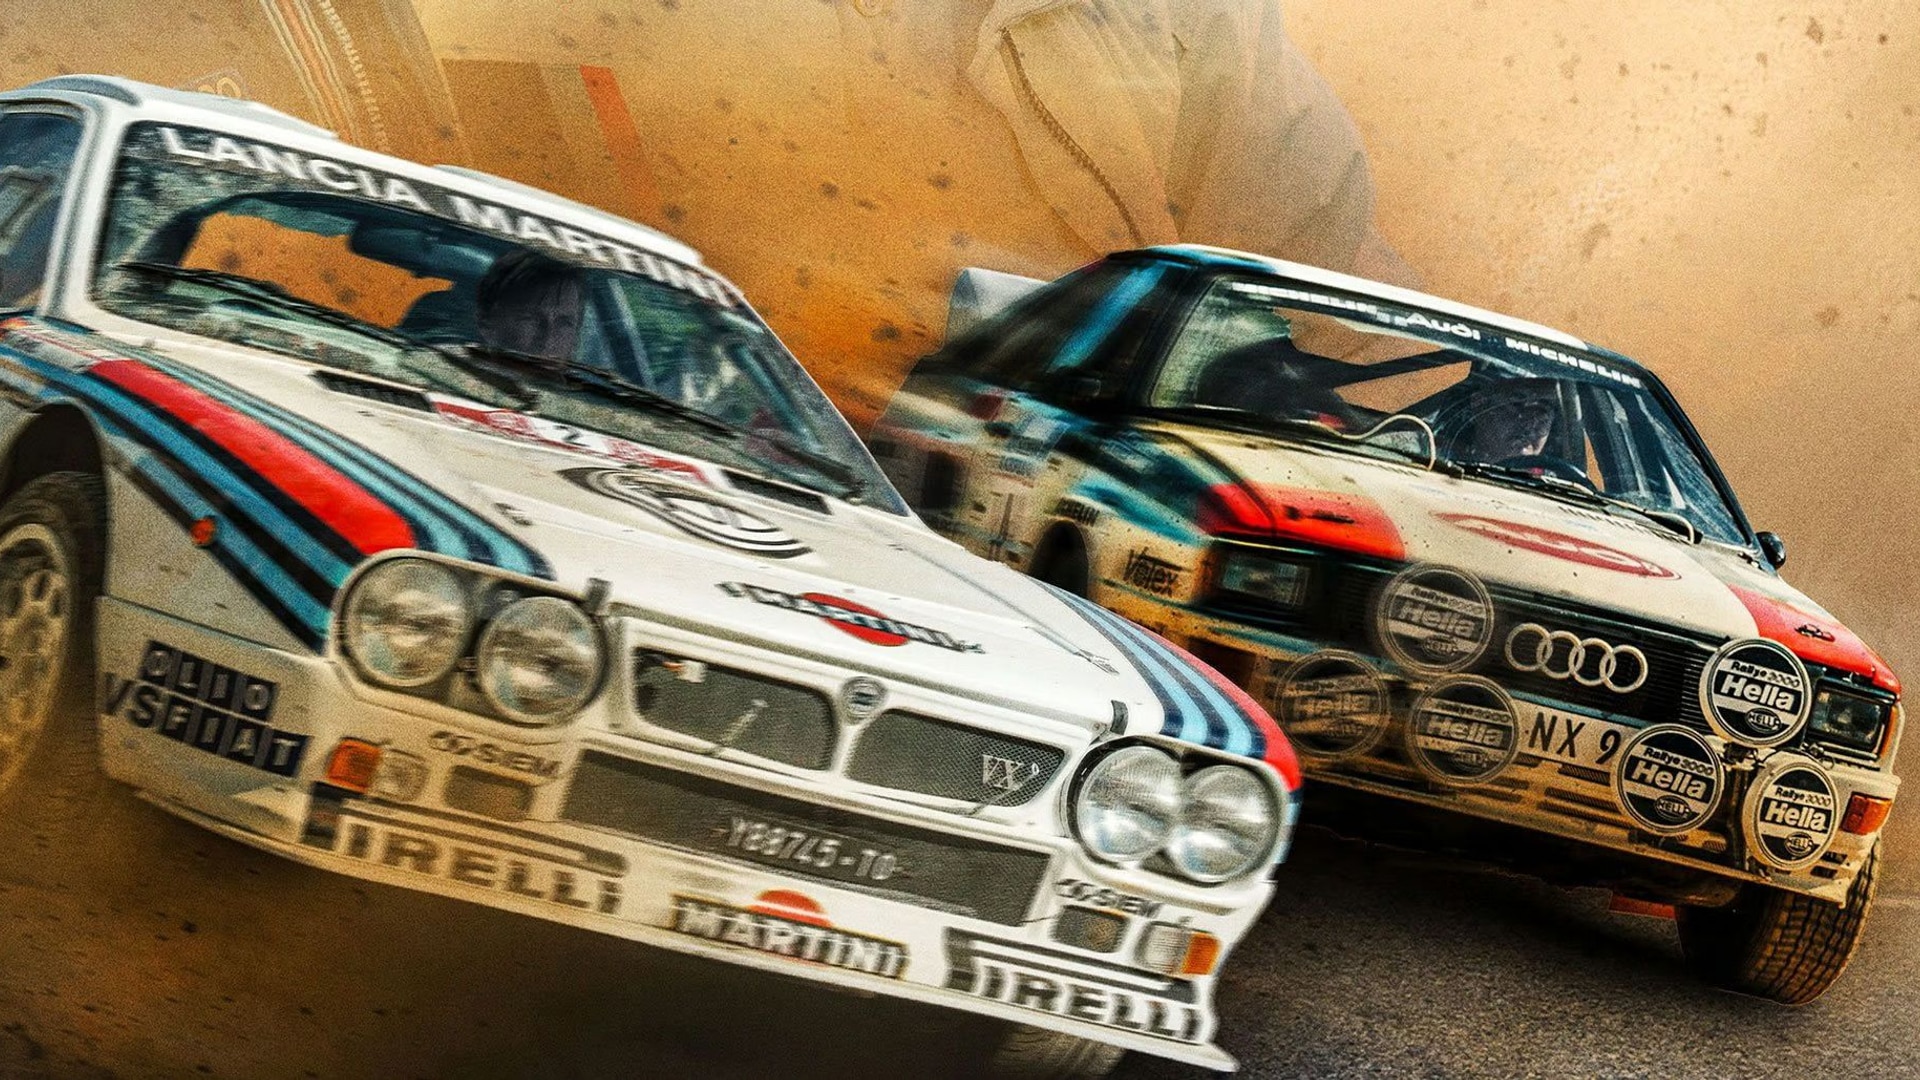 “Race For Glory” is an upcoming movie about Group B rally racing